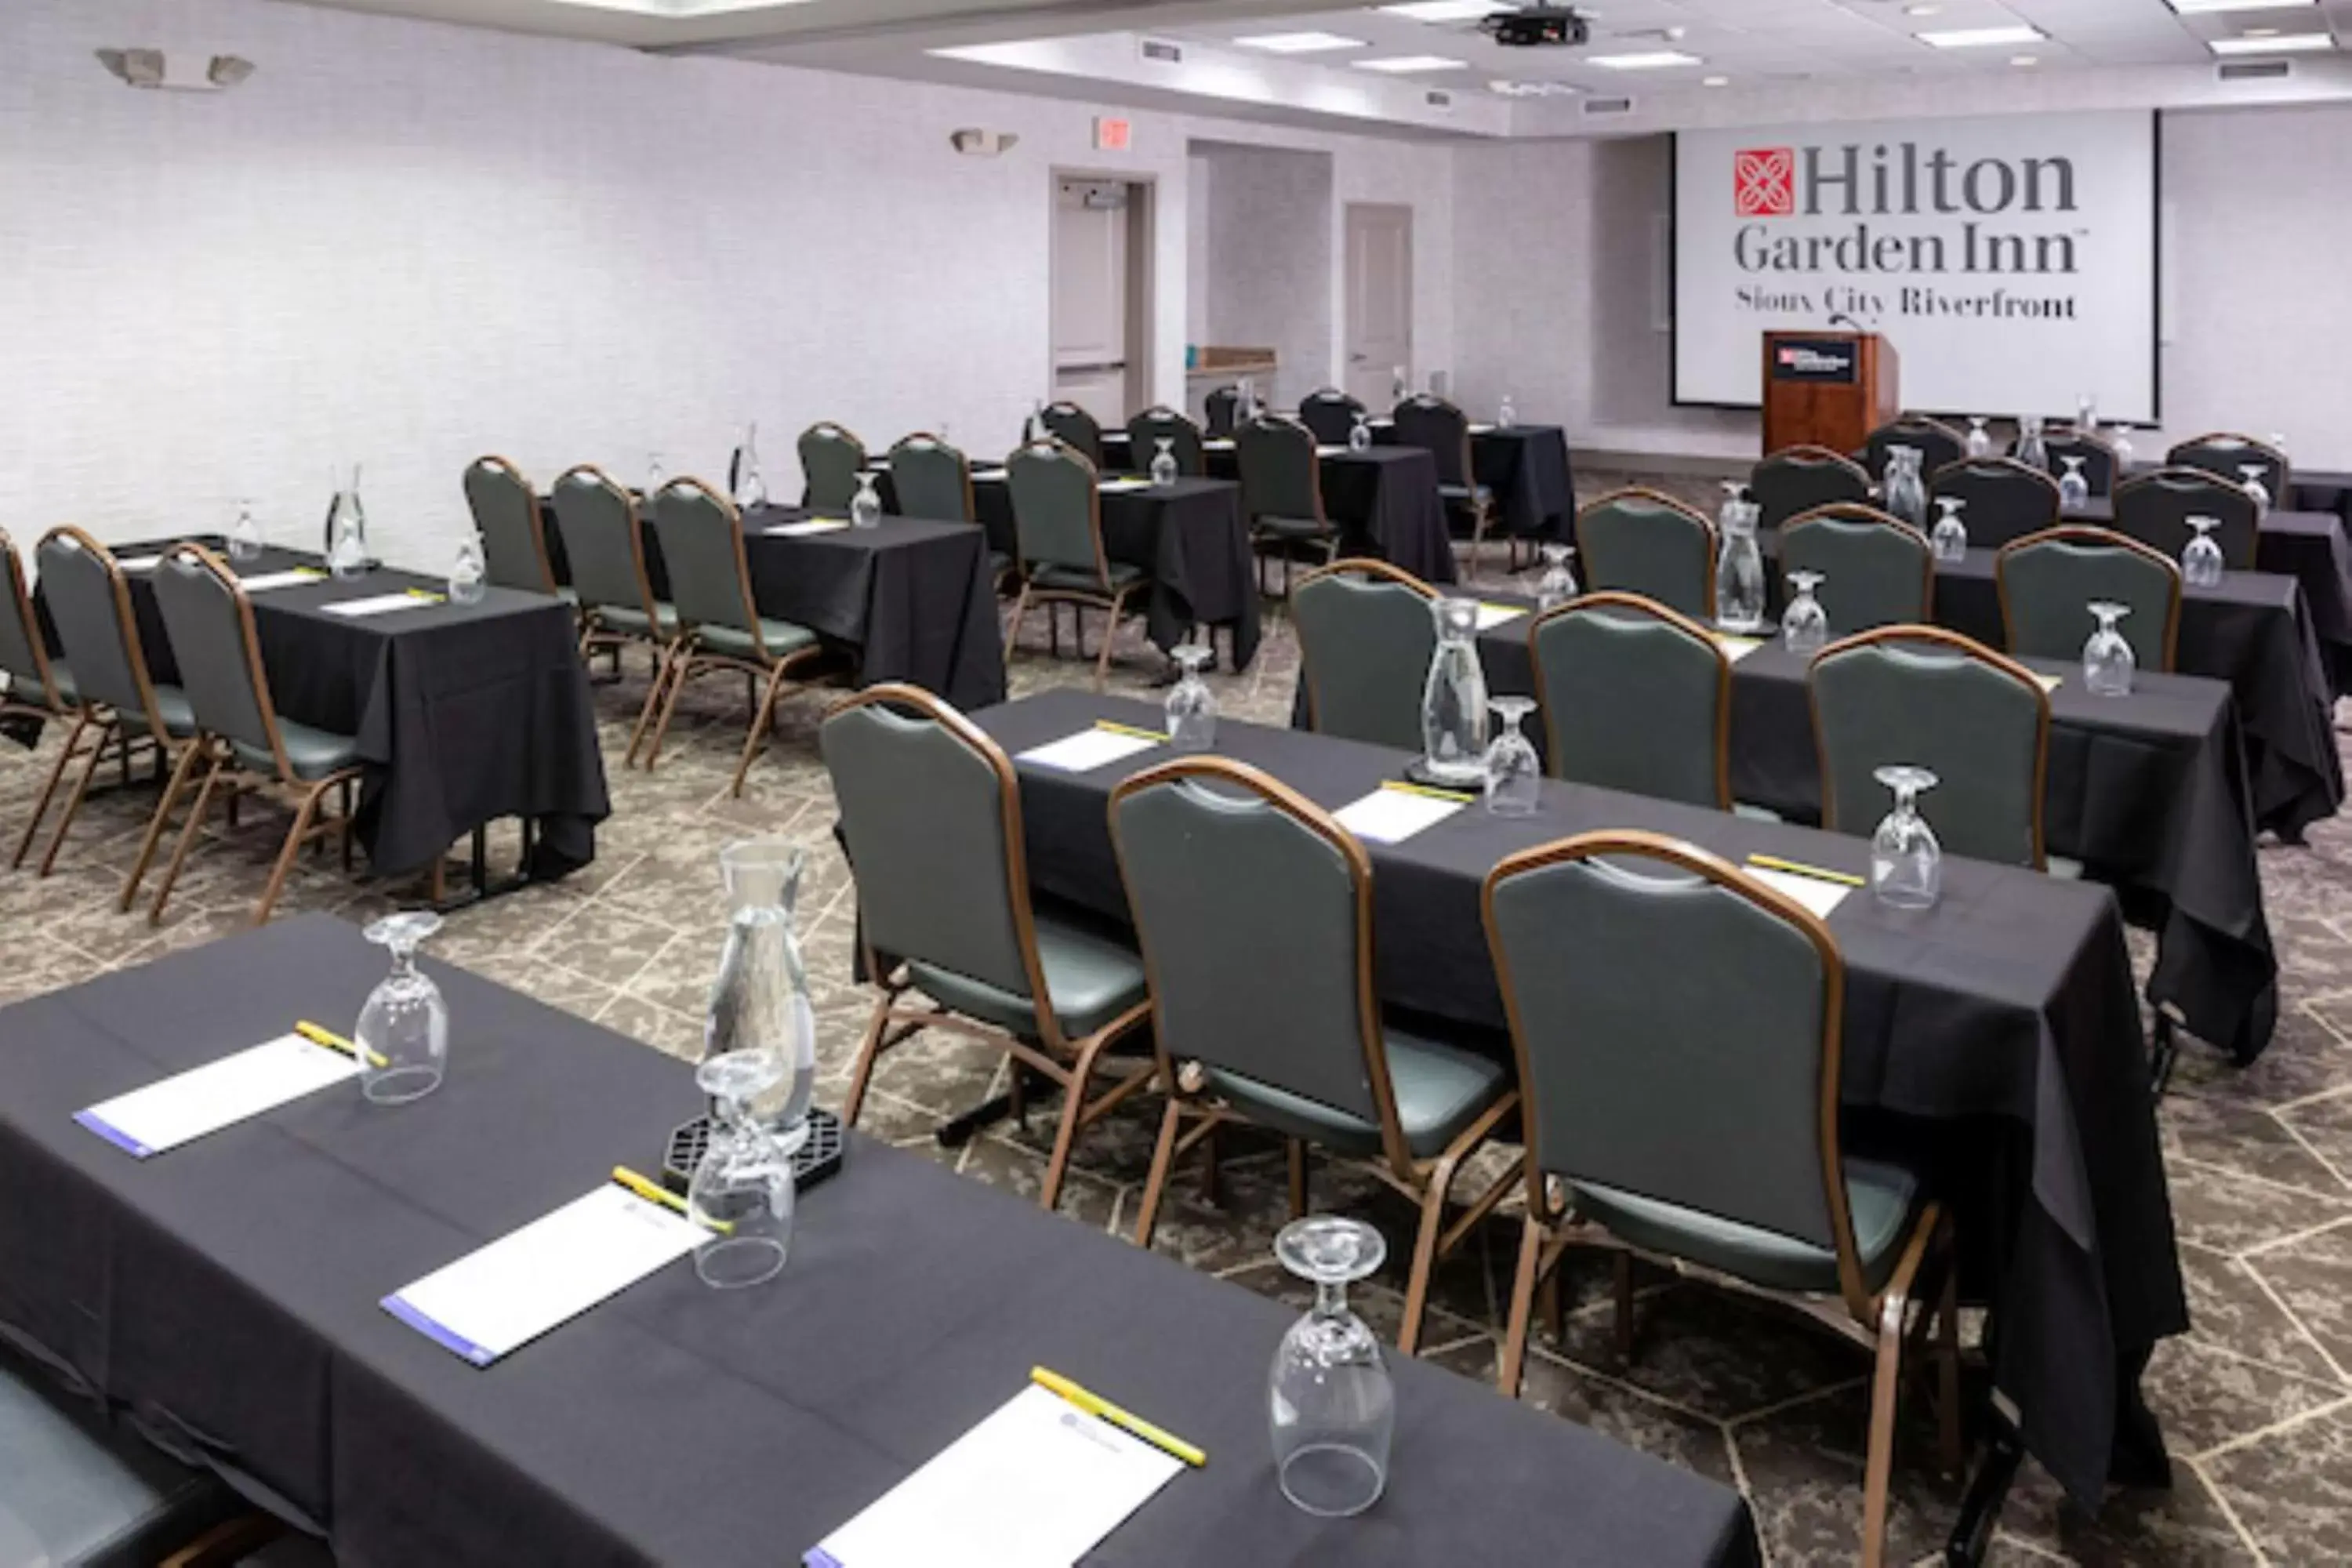 Meeting/conference room in Hilton Garden Inn Sioux City Riverfront